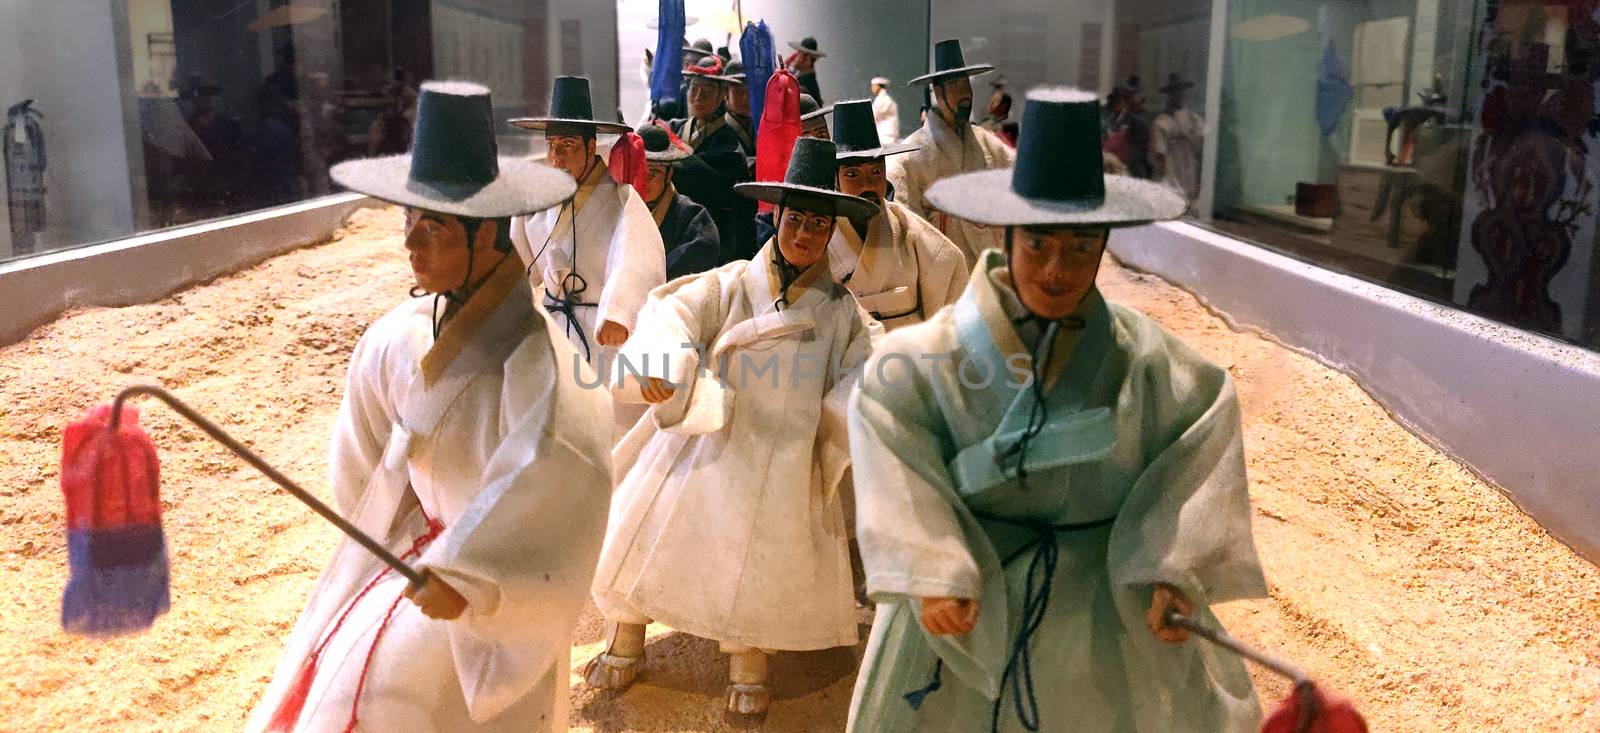 A traditional wedding procession in ancient Korea by mshivangi92